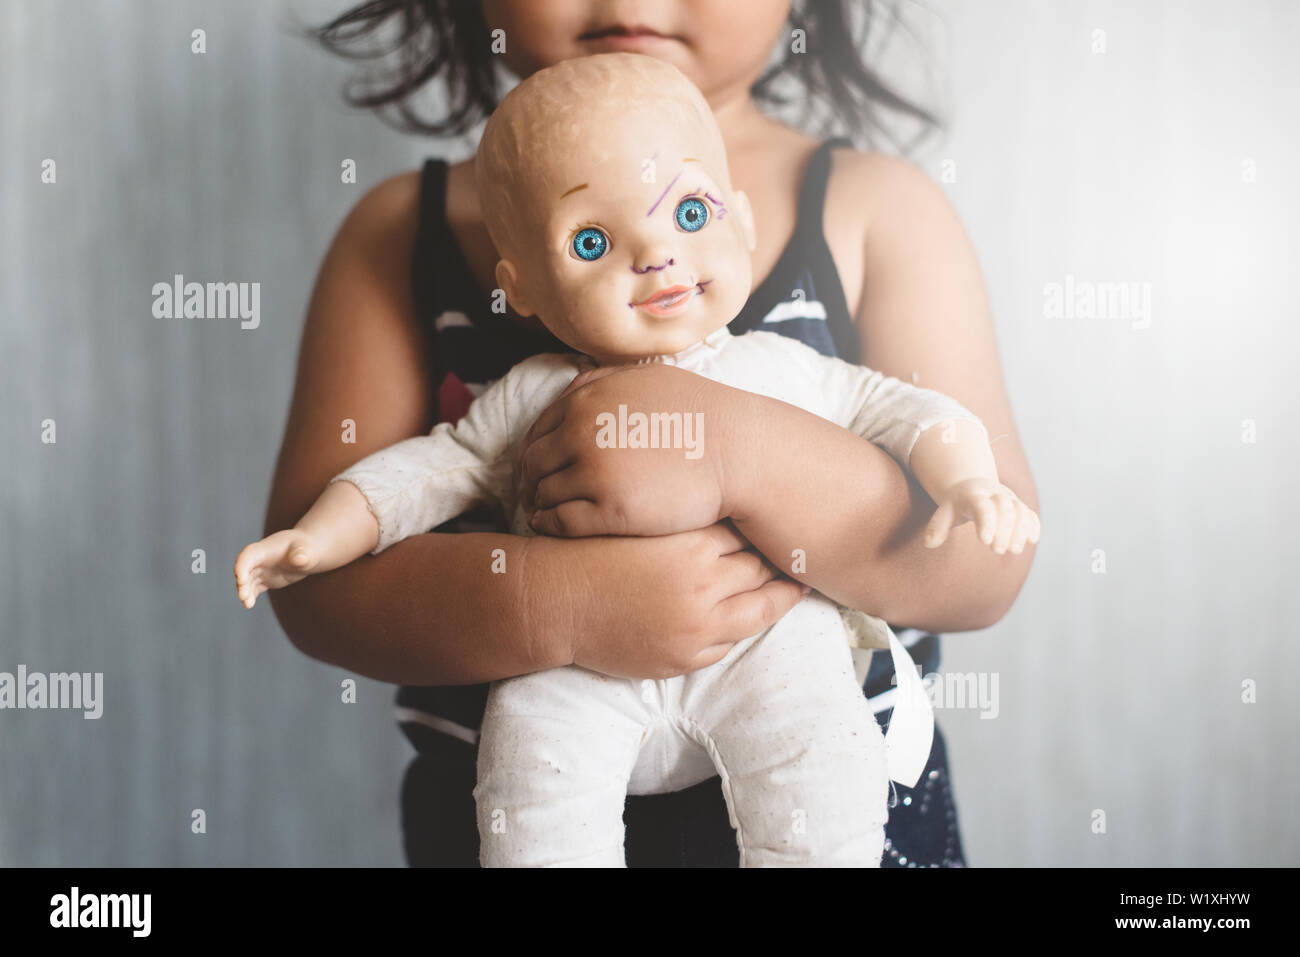 little asian girl hugging her favorite worn grimy doll. Concept of Lonely child, love, childhood and parenting. Selective focus on the doll. Stock Photo